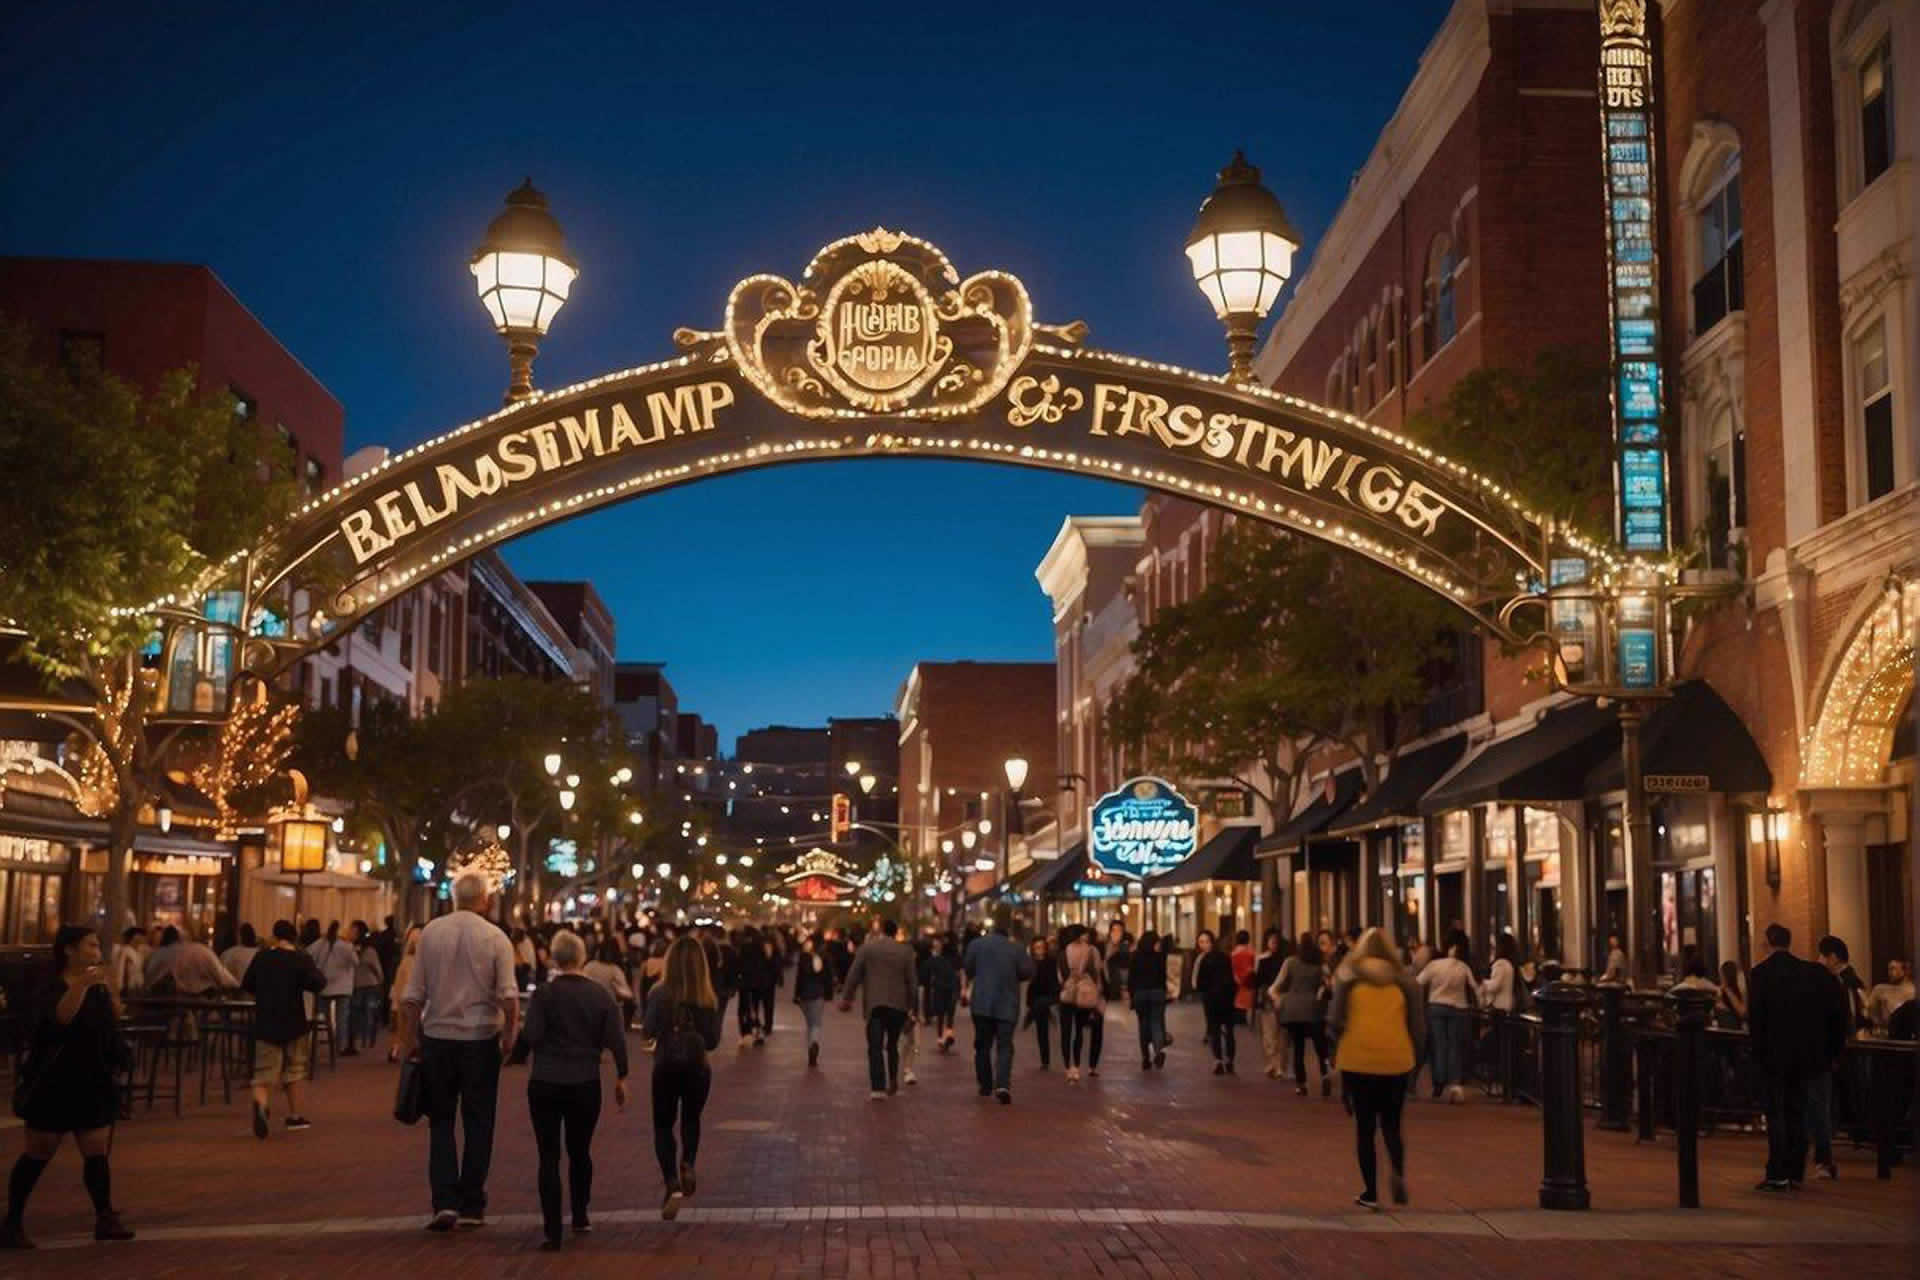 The Gaslamp Quarter bustles with vibrant nightlife, historic architecture, and bustling restaurants. The streets are lined with colorful buildings and lively crowds, while the iconic Gaslamp archway welcomes visitors to the lively district